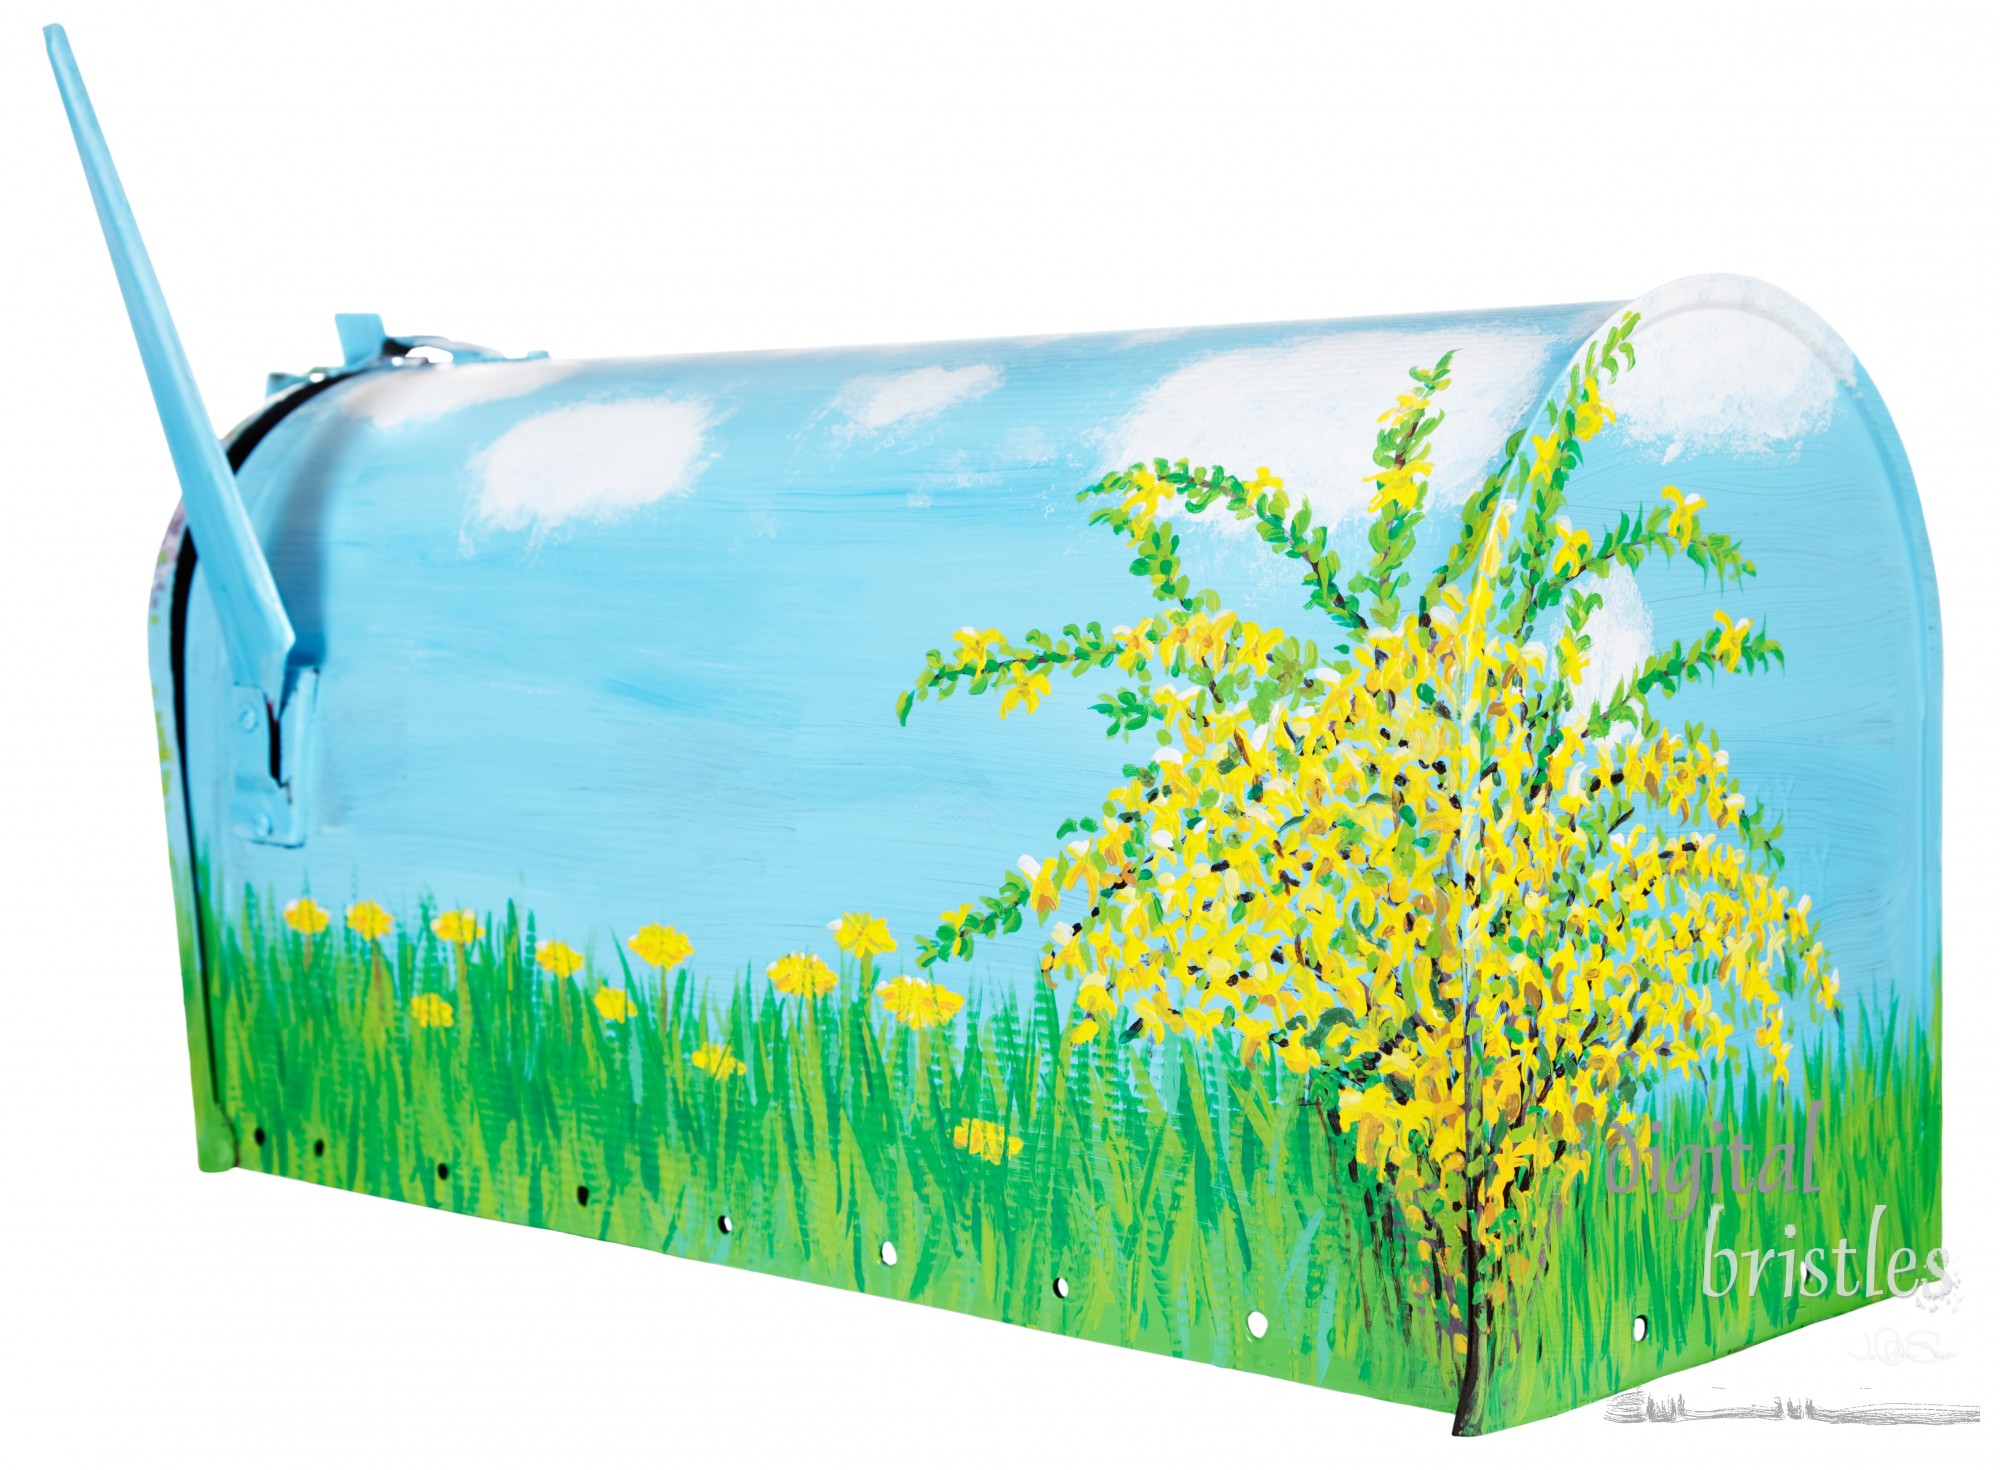 Hand painted forsythia flowers, dandelions & grass on a mailbox